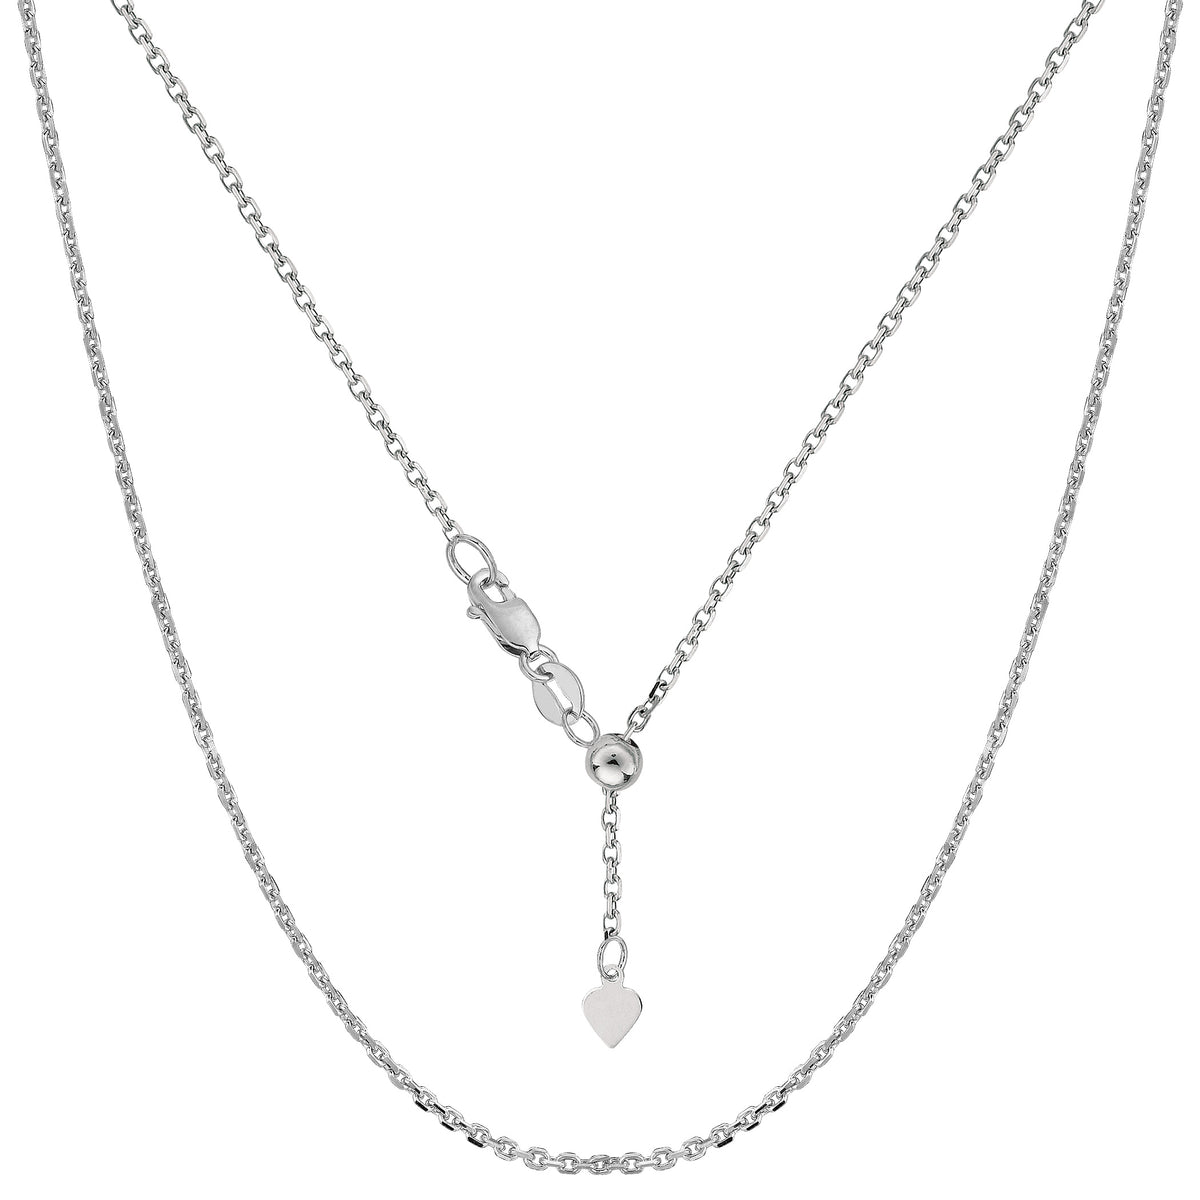 Sterling Silver Rhodium Plated 22" Sliding Adjustable Cable Chain Necklace, 1.5mm fine designer jewelry for men and women